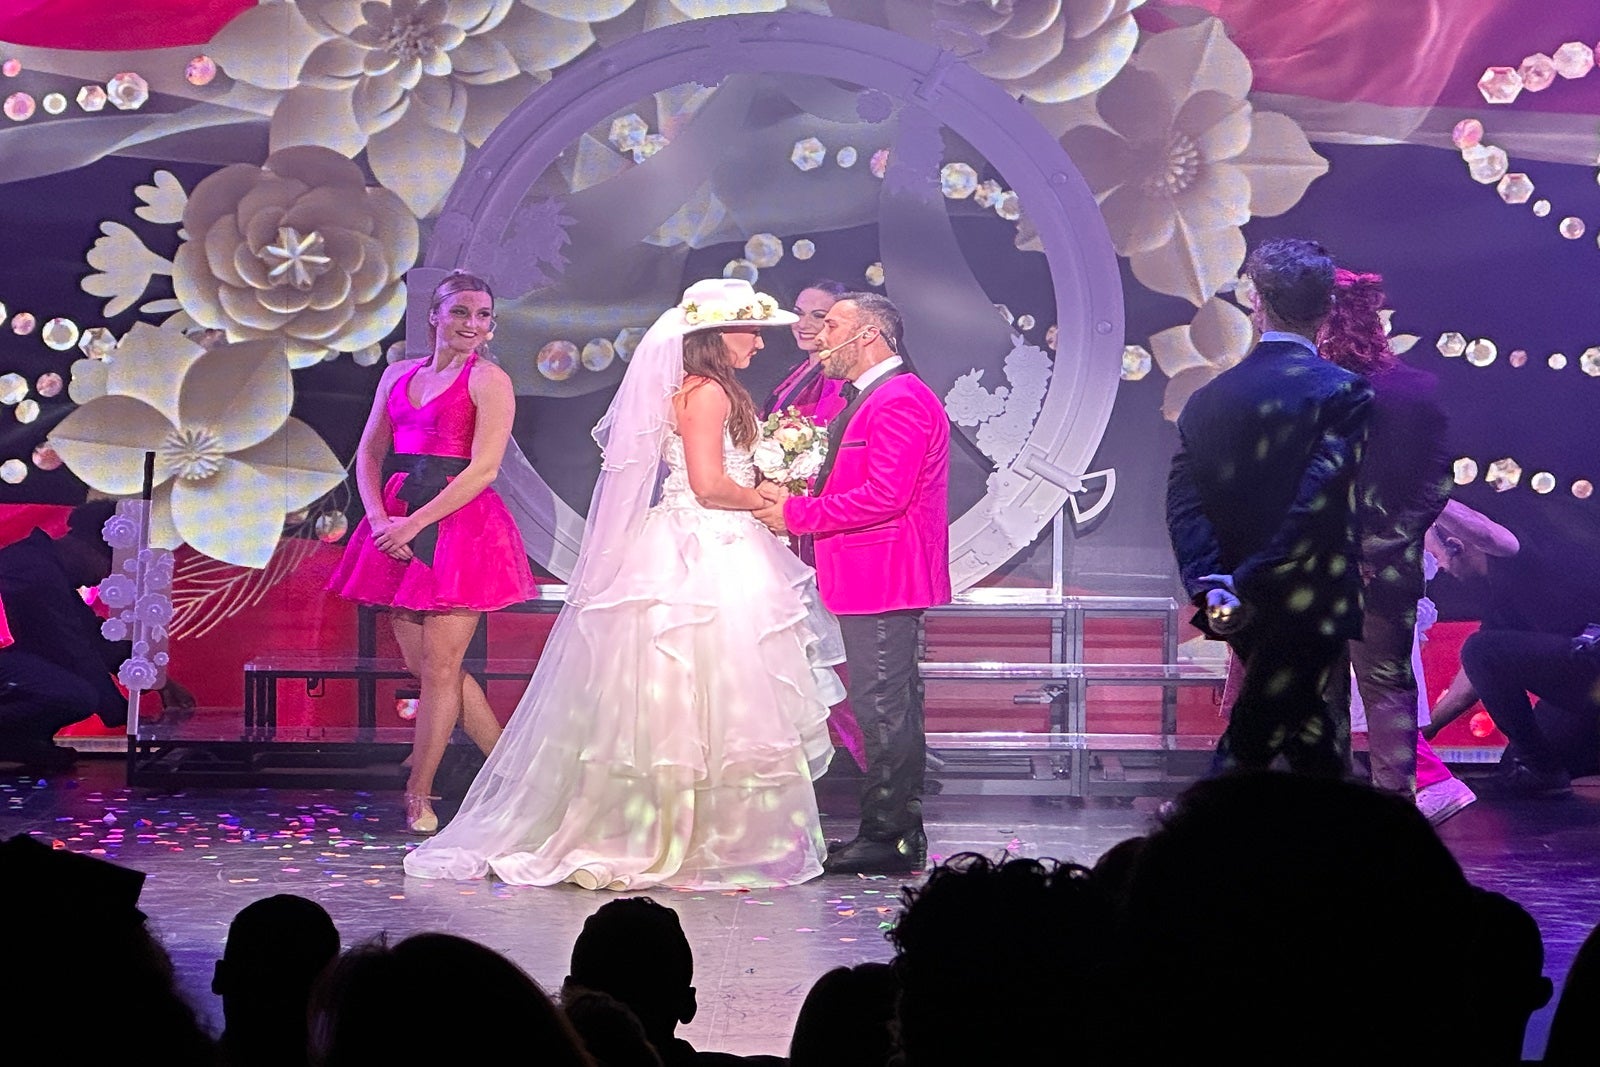 Two performers get married on stage as part of a cruise ship show